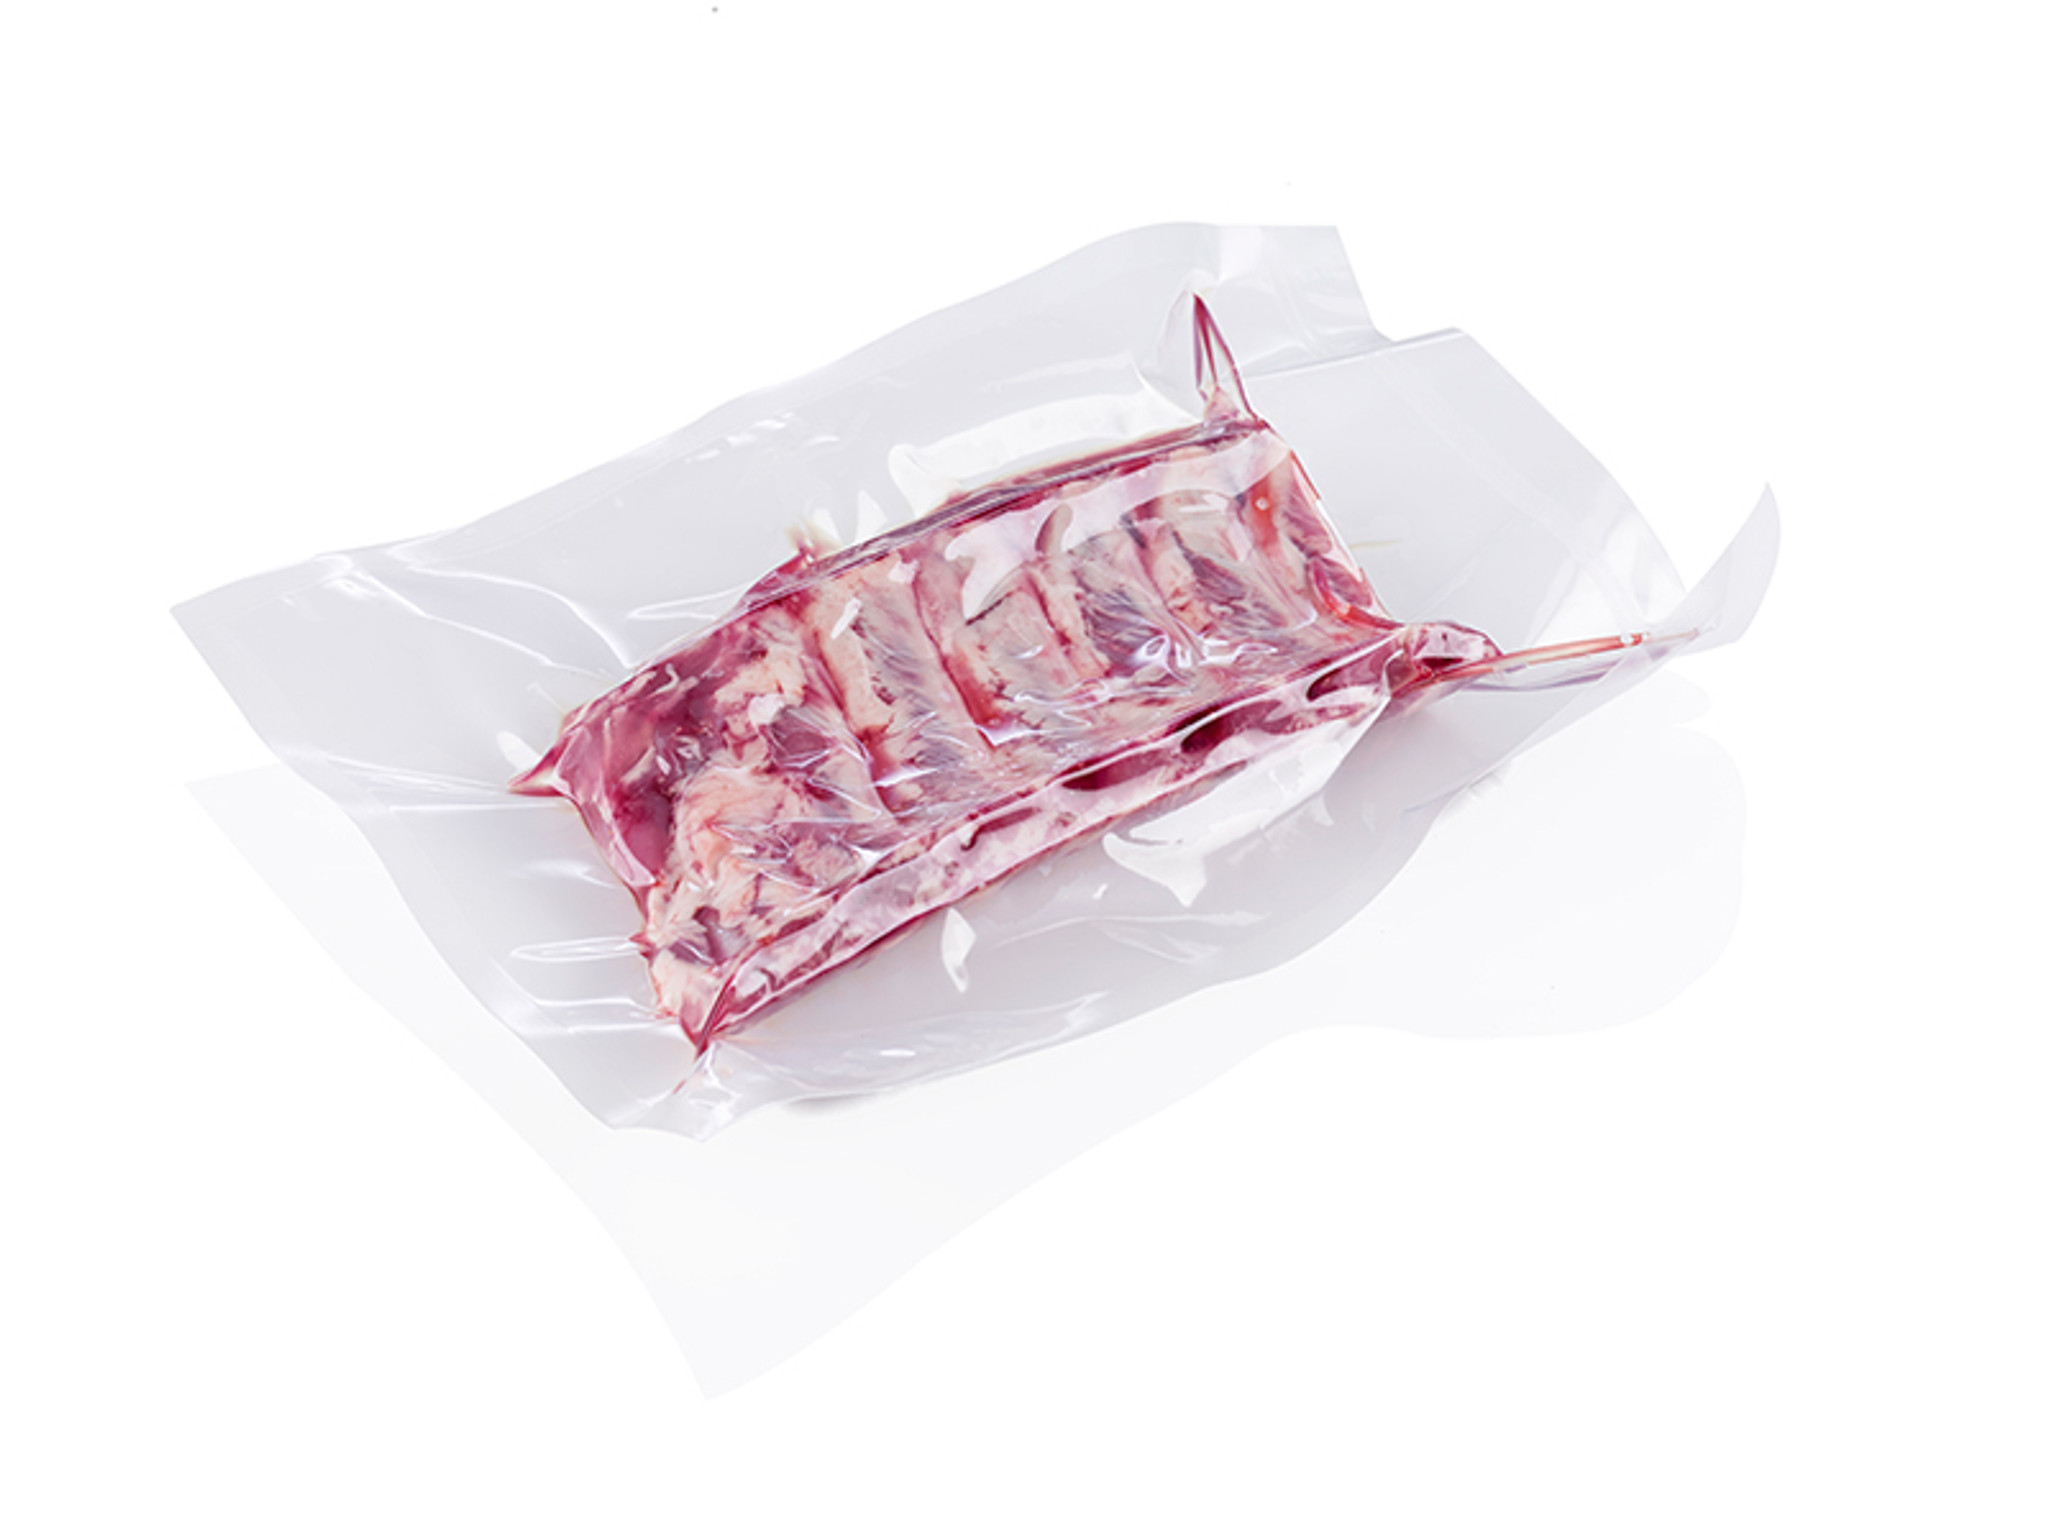 Ultrasource Meat Freezer Bags 1 lb White Pack of 1000